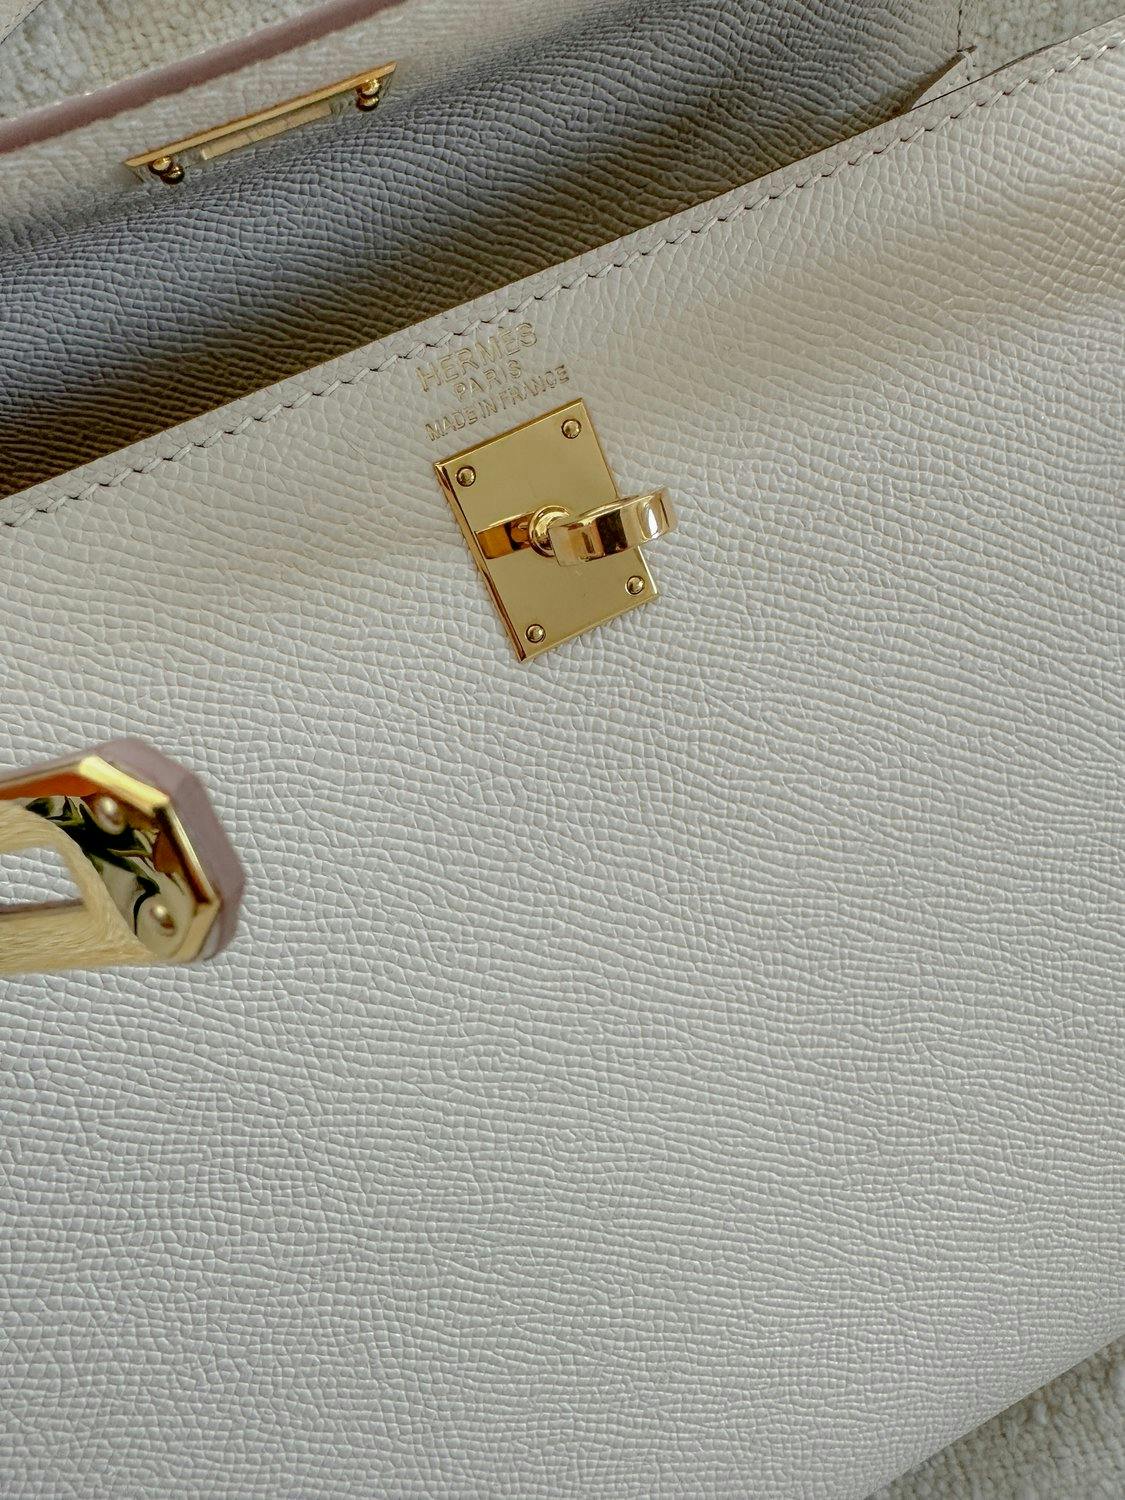 A Full Review of Hermes Kelly 25 by Sachini Dilanka